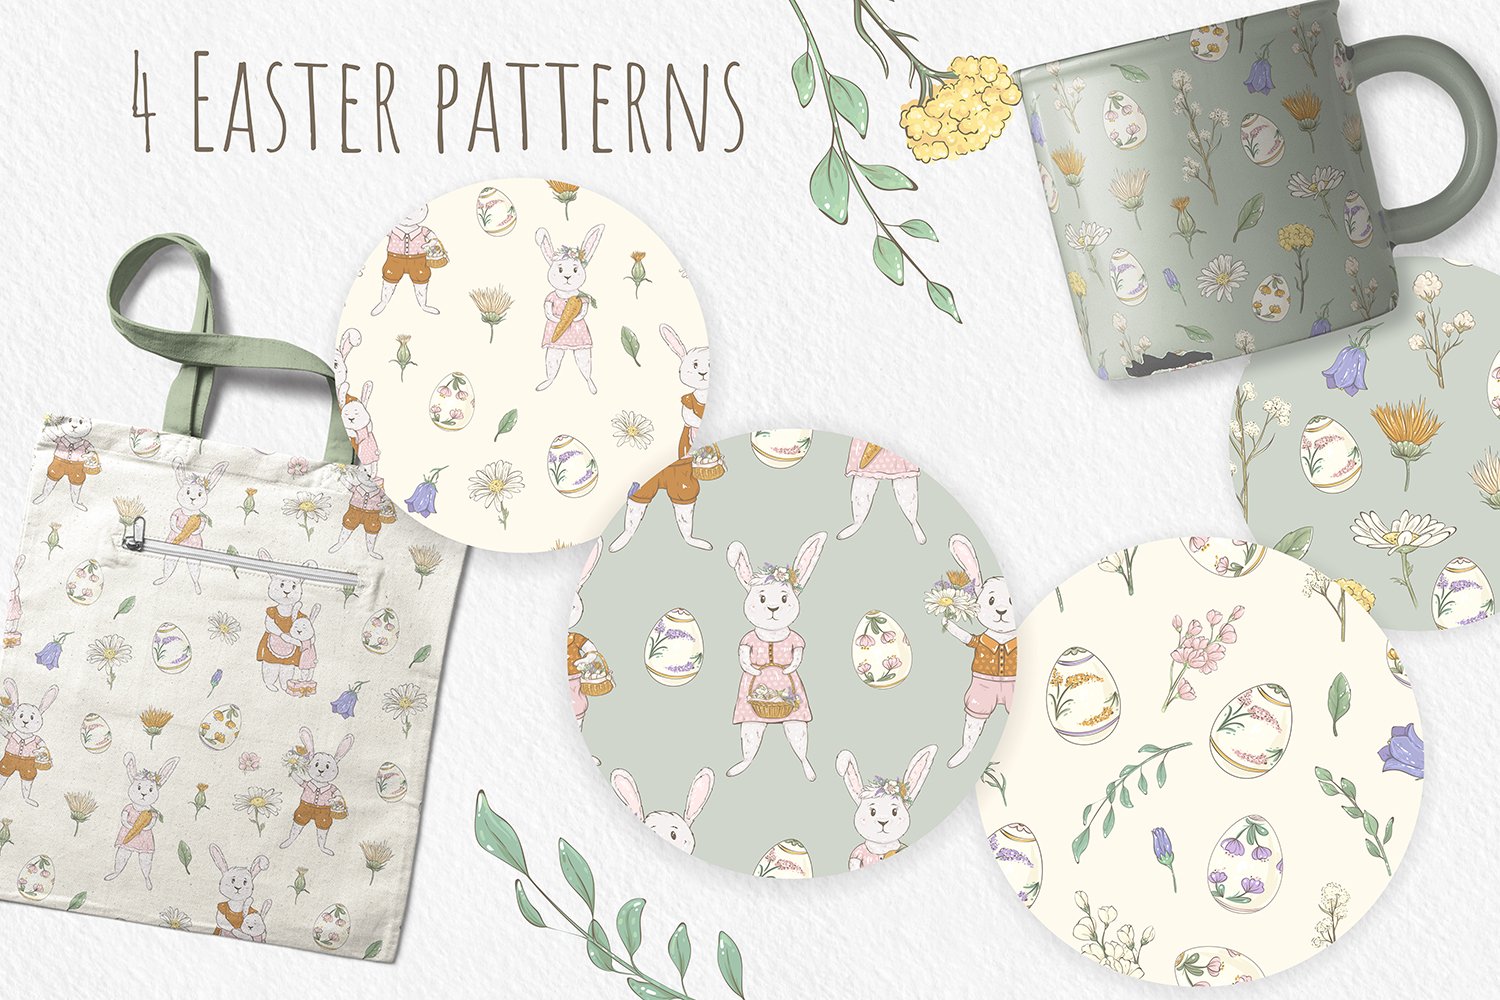 Light and delicate Easter patterns.